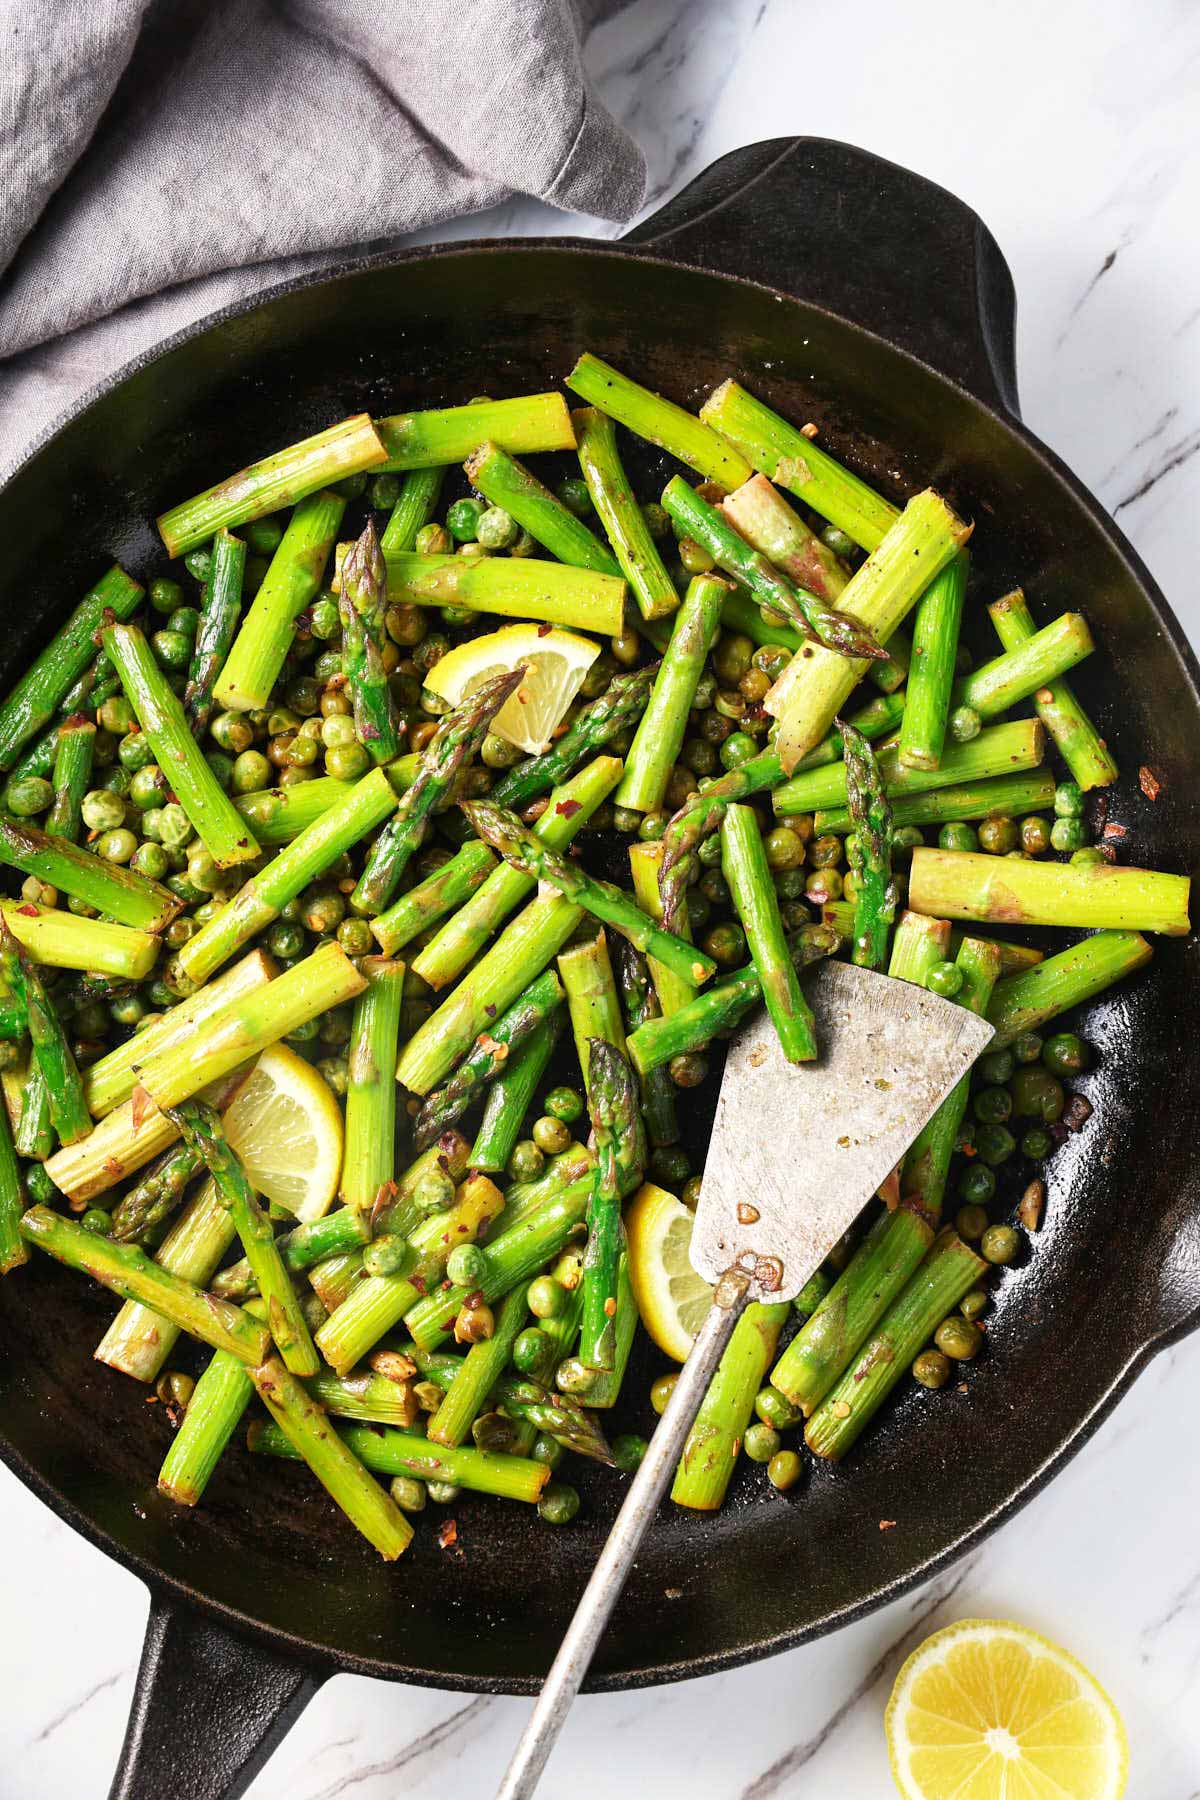 Roasted asparagus and peas in a cast iron pan with a metal spatula. There is a gray napkin and a half-lemon piece on the side. 